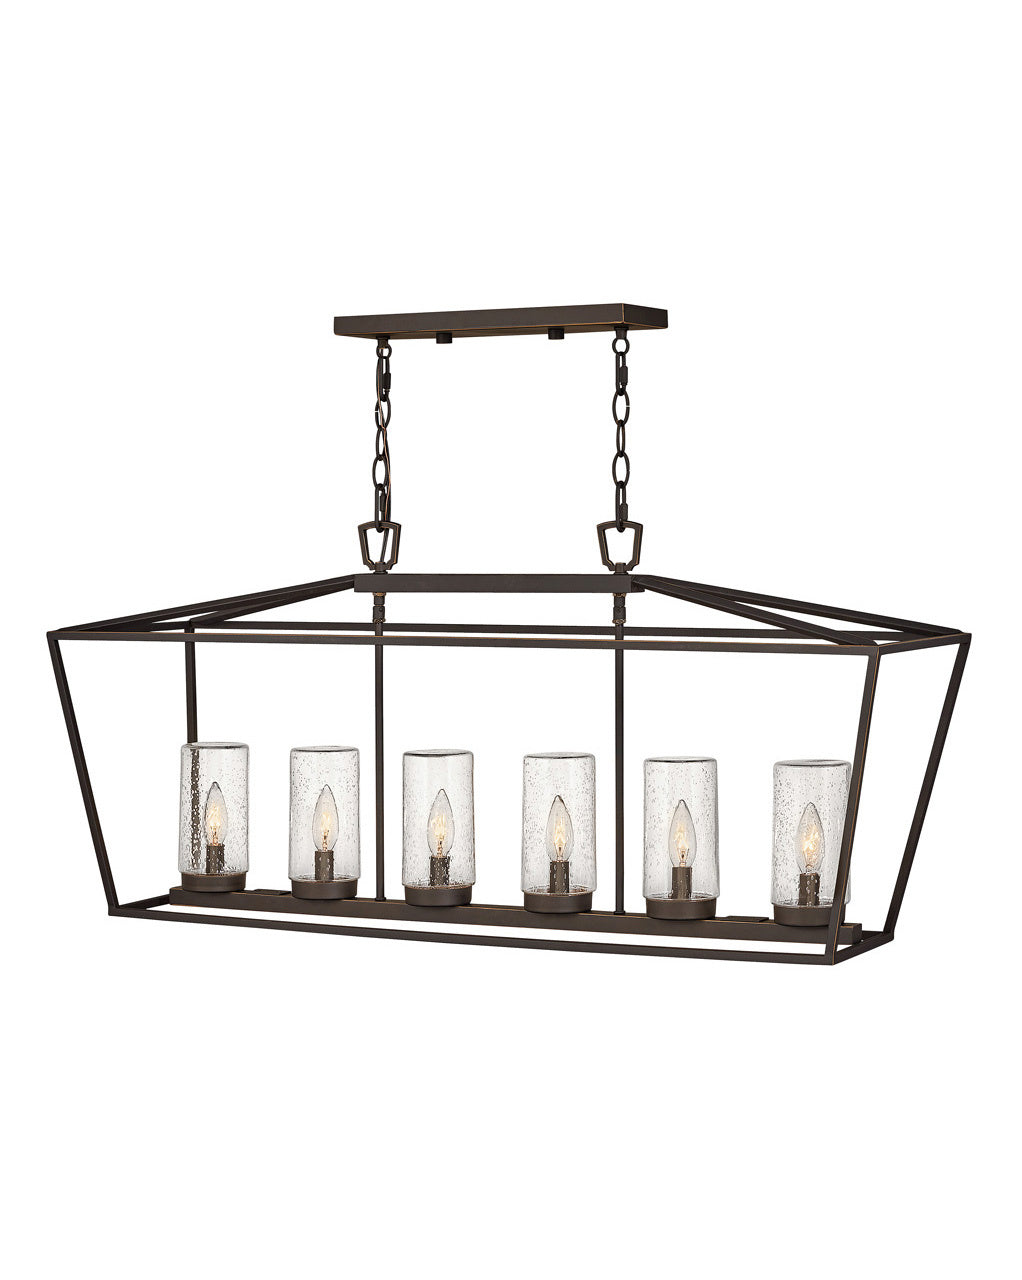 Hinkley Canada - LED Linear Chandelier - Alford Place - Oil Rubbed Bronze- Union Lighting Luminaires Decor